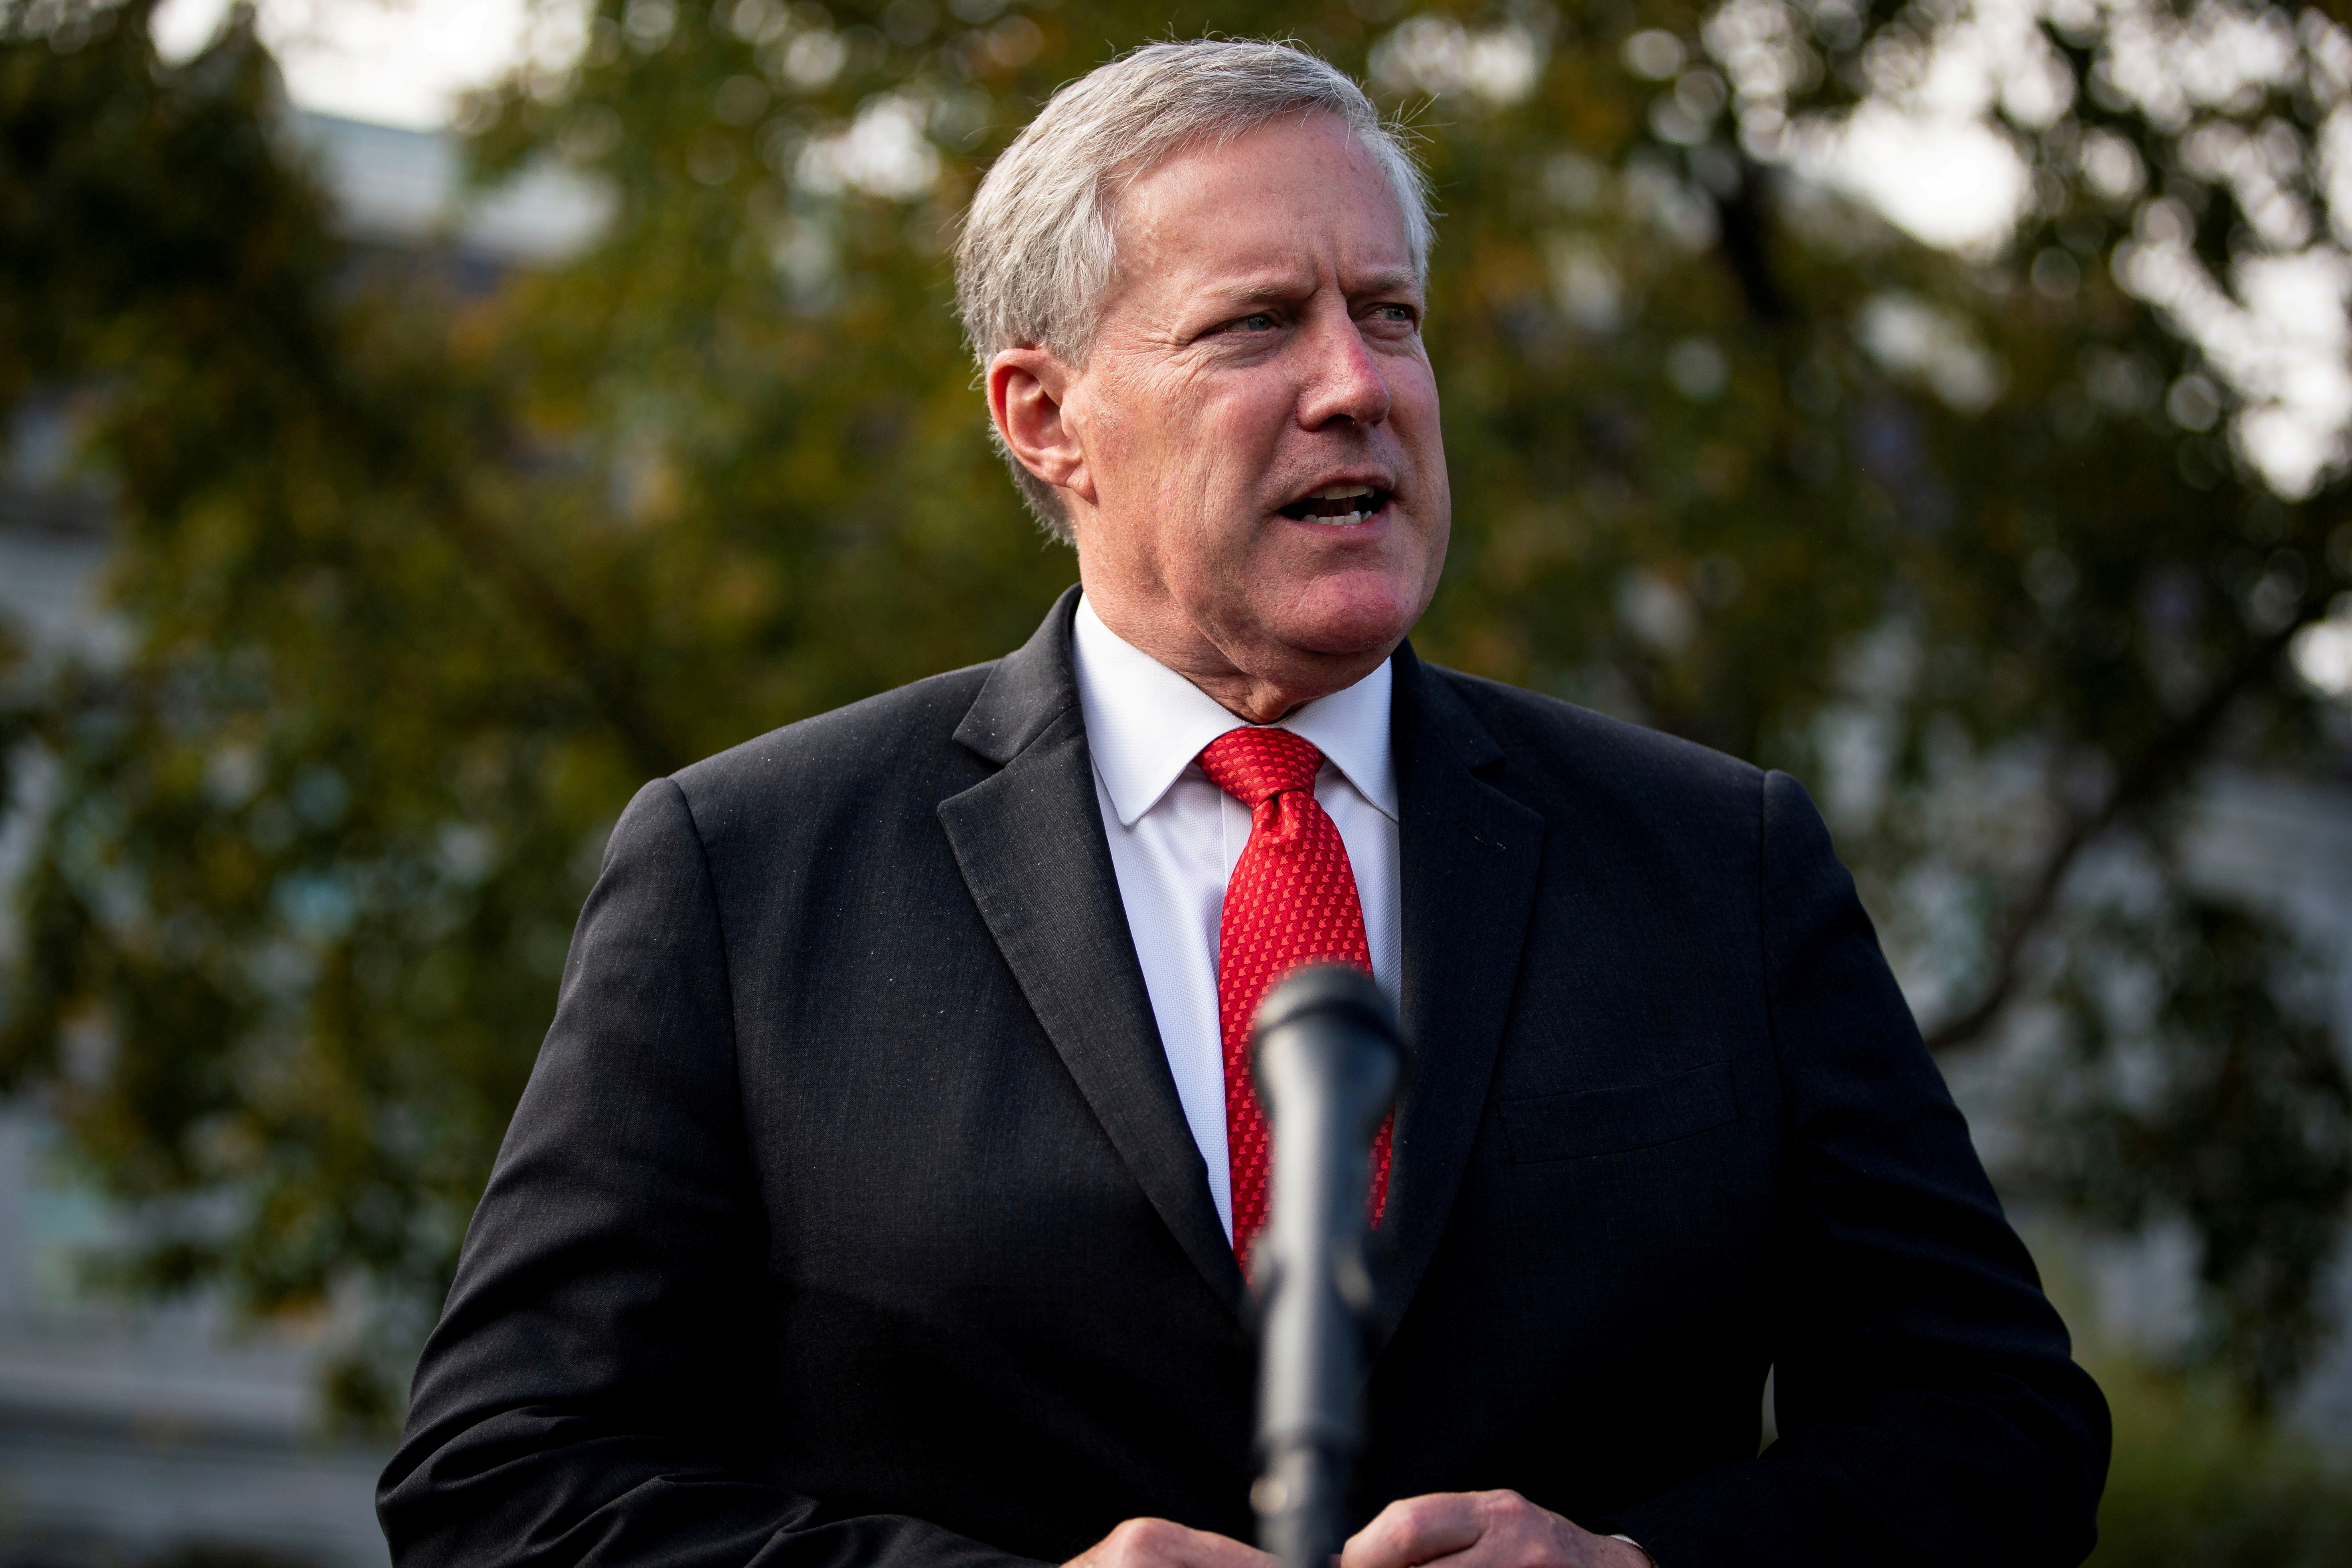 White House Chief of Staff Mark Meadows speaks to reporters following a television interview, outside the White House in Washington, U.S. October 21, 2020. REUTERS/Al Drago